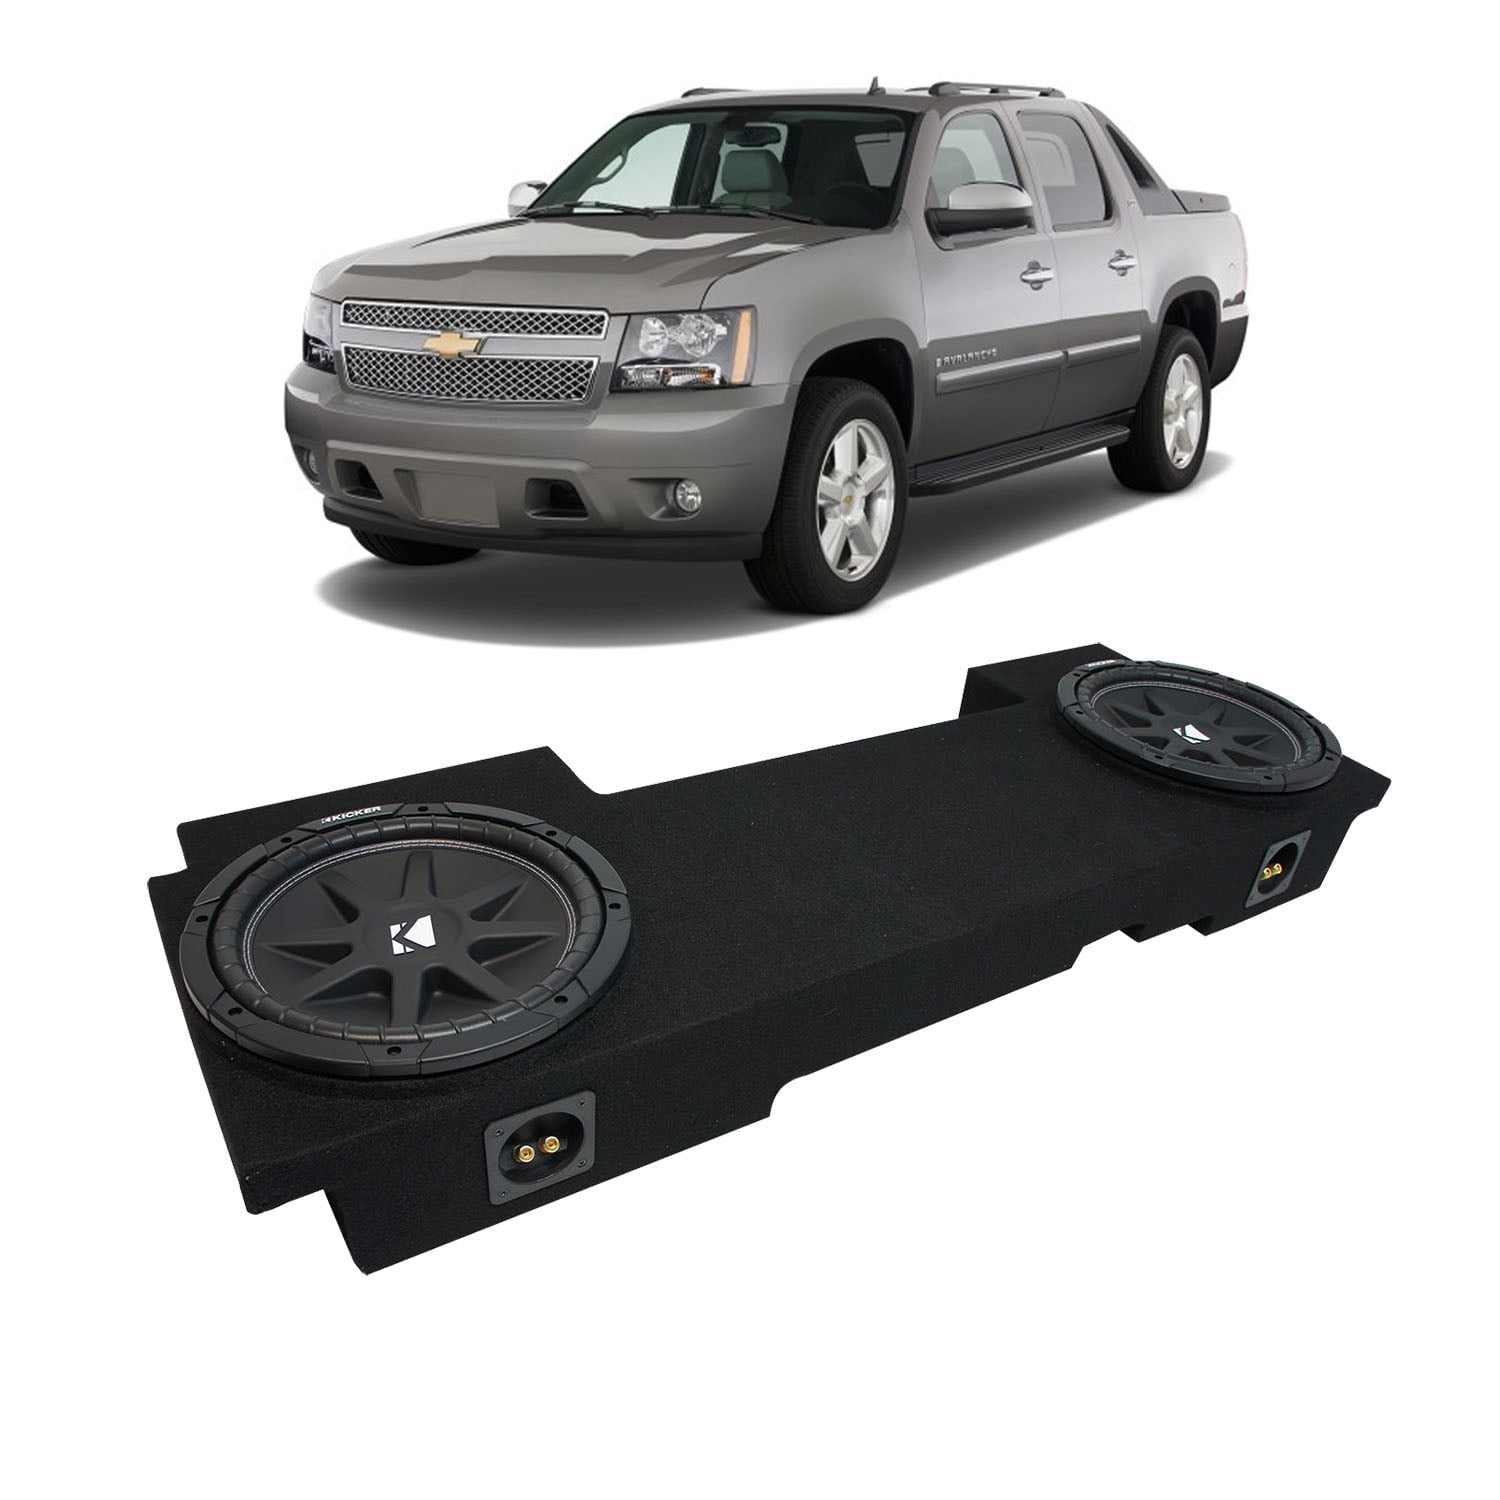 Compatible with Chevy Avalanche 02-09 Dual 12 Kicker CVT12 Subwoofer Behind Seat Sub Box Enclosure 1600 Watts Peak 